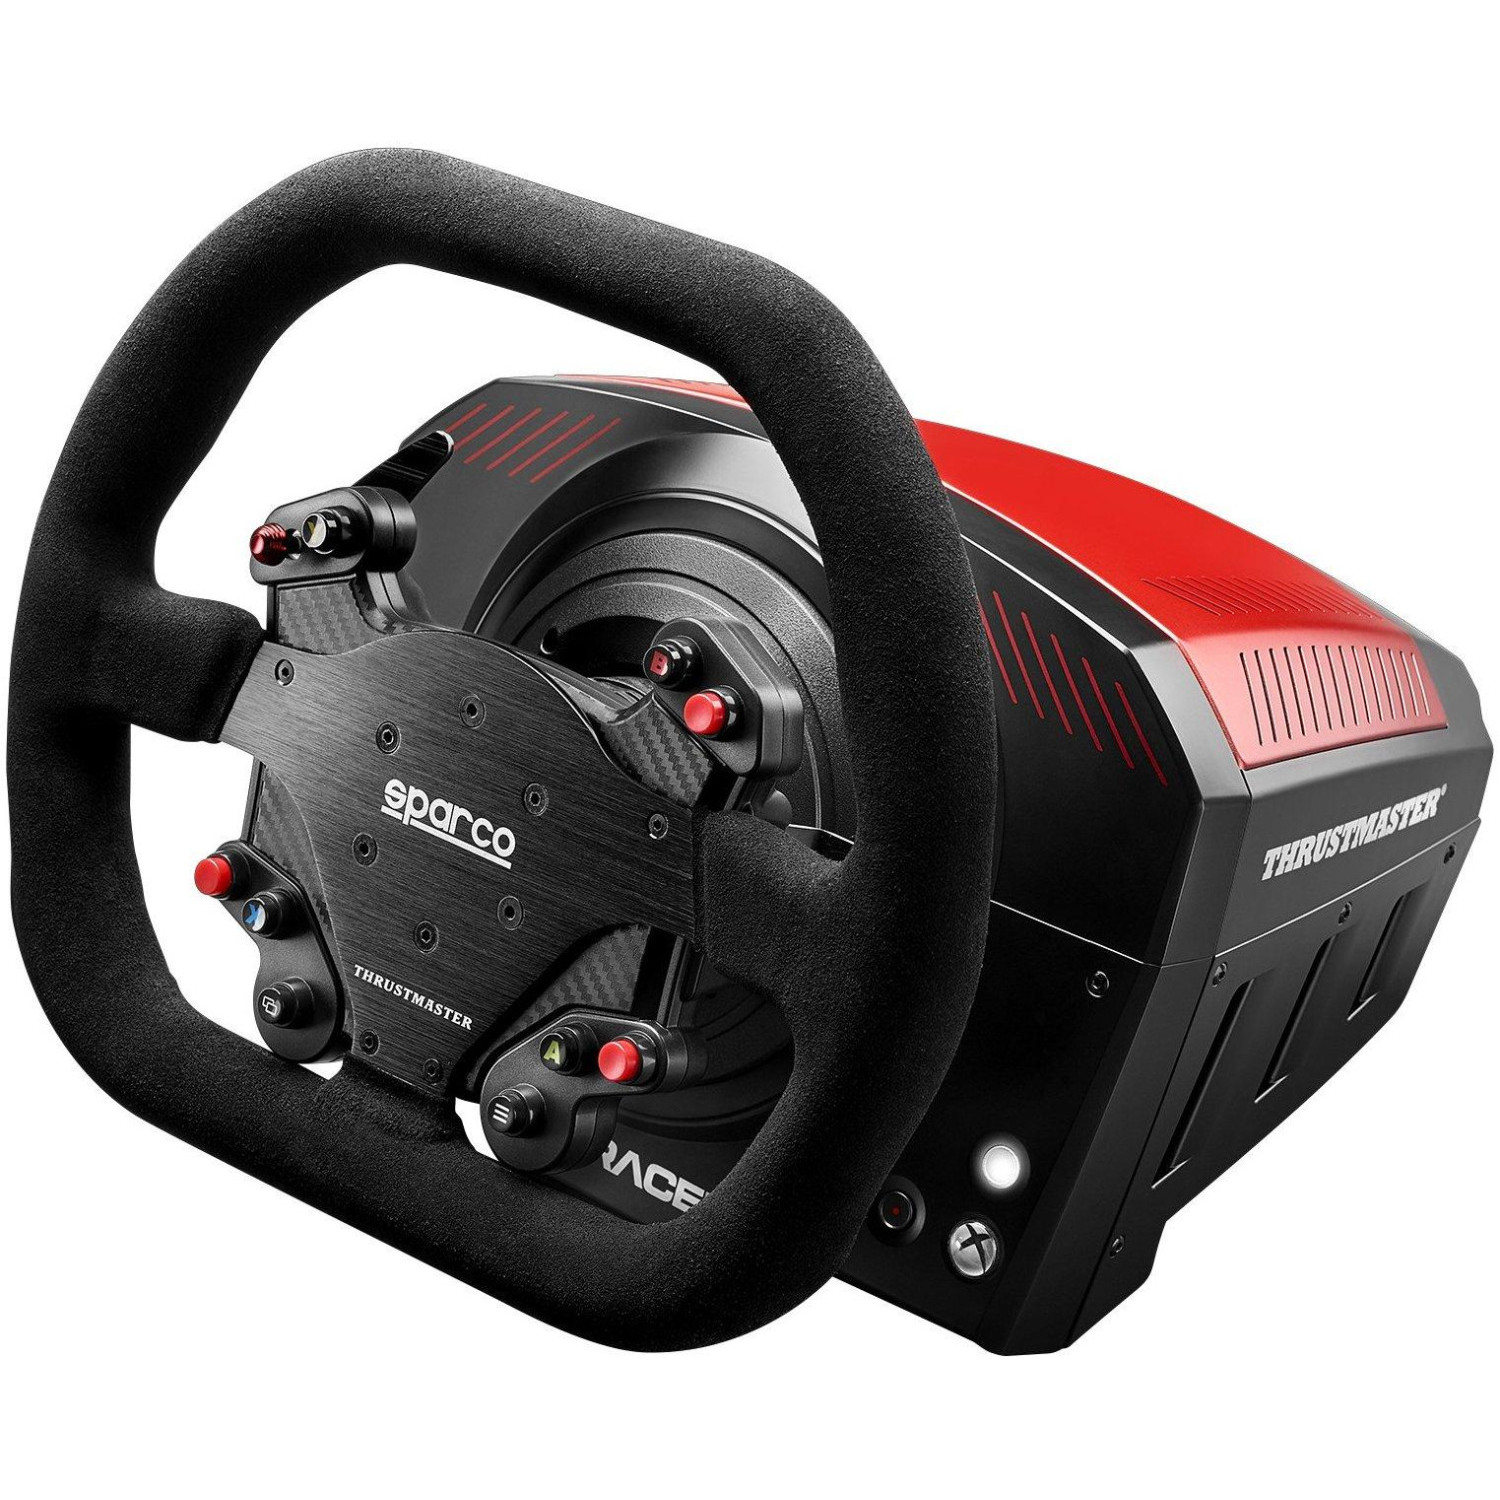 Волан за игри THRUSTMASTER THRUSTMASTER TS-XW Sparco P310 Racer Competition Mod Wheel for Xbox/PC